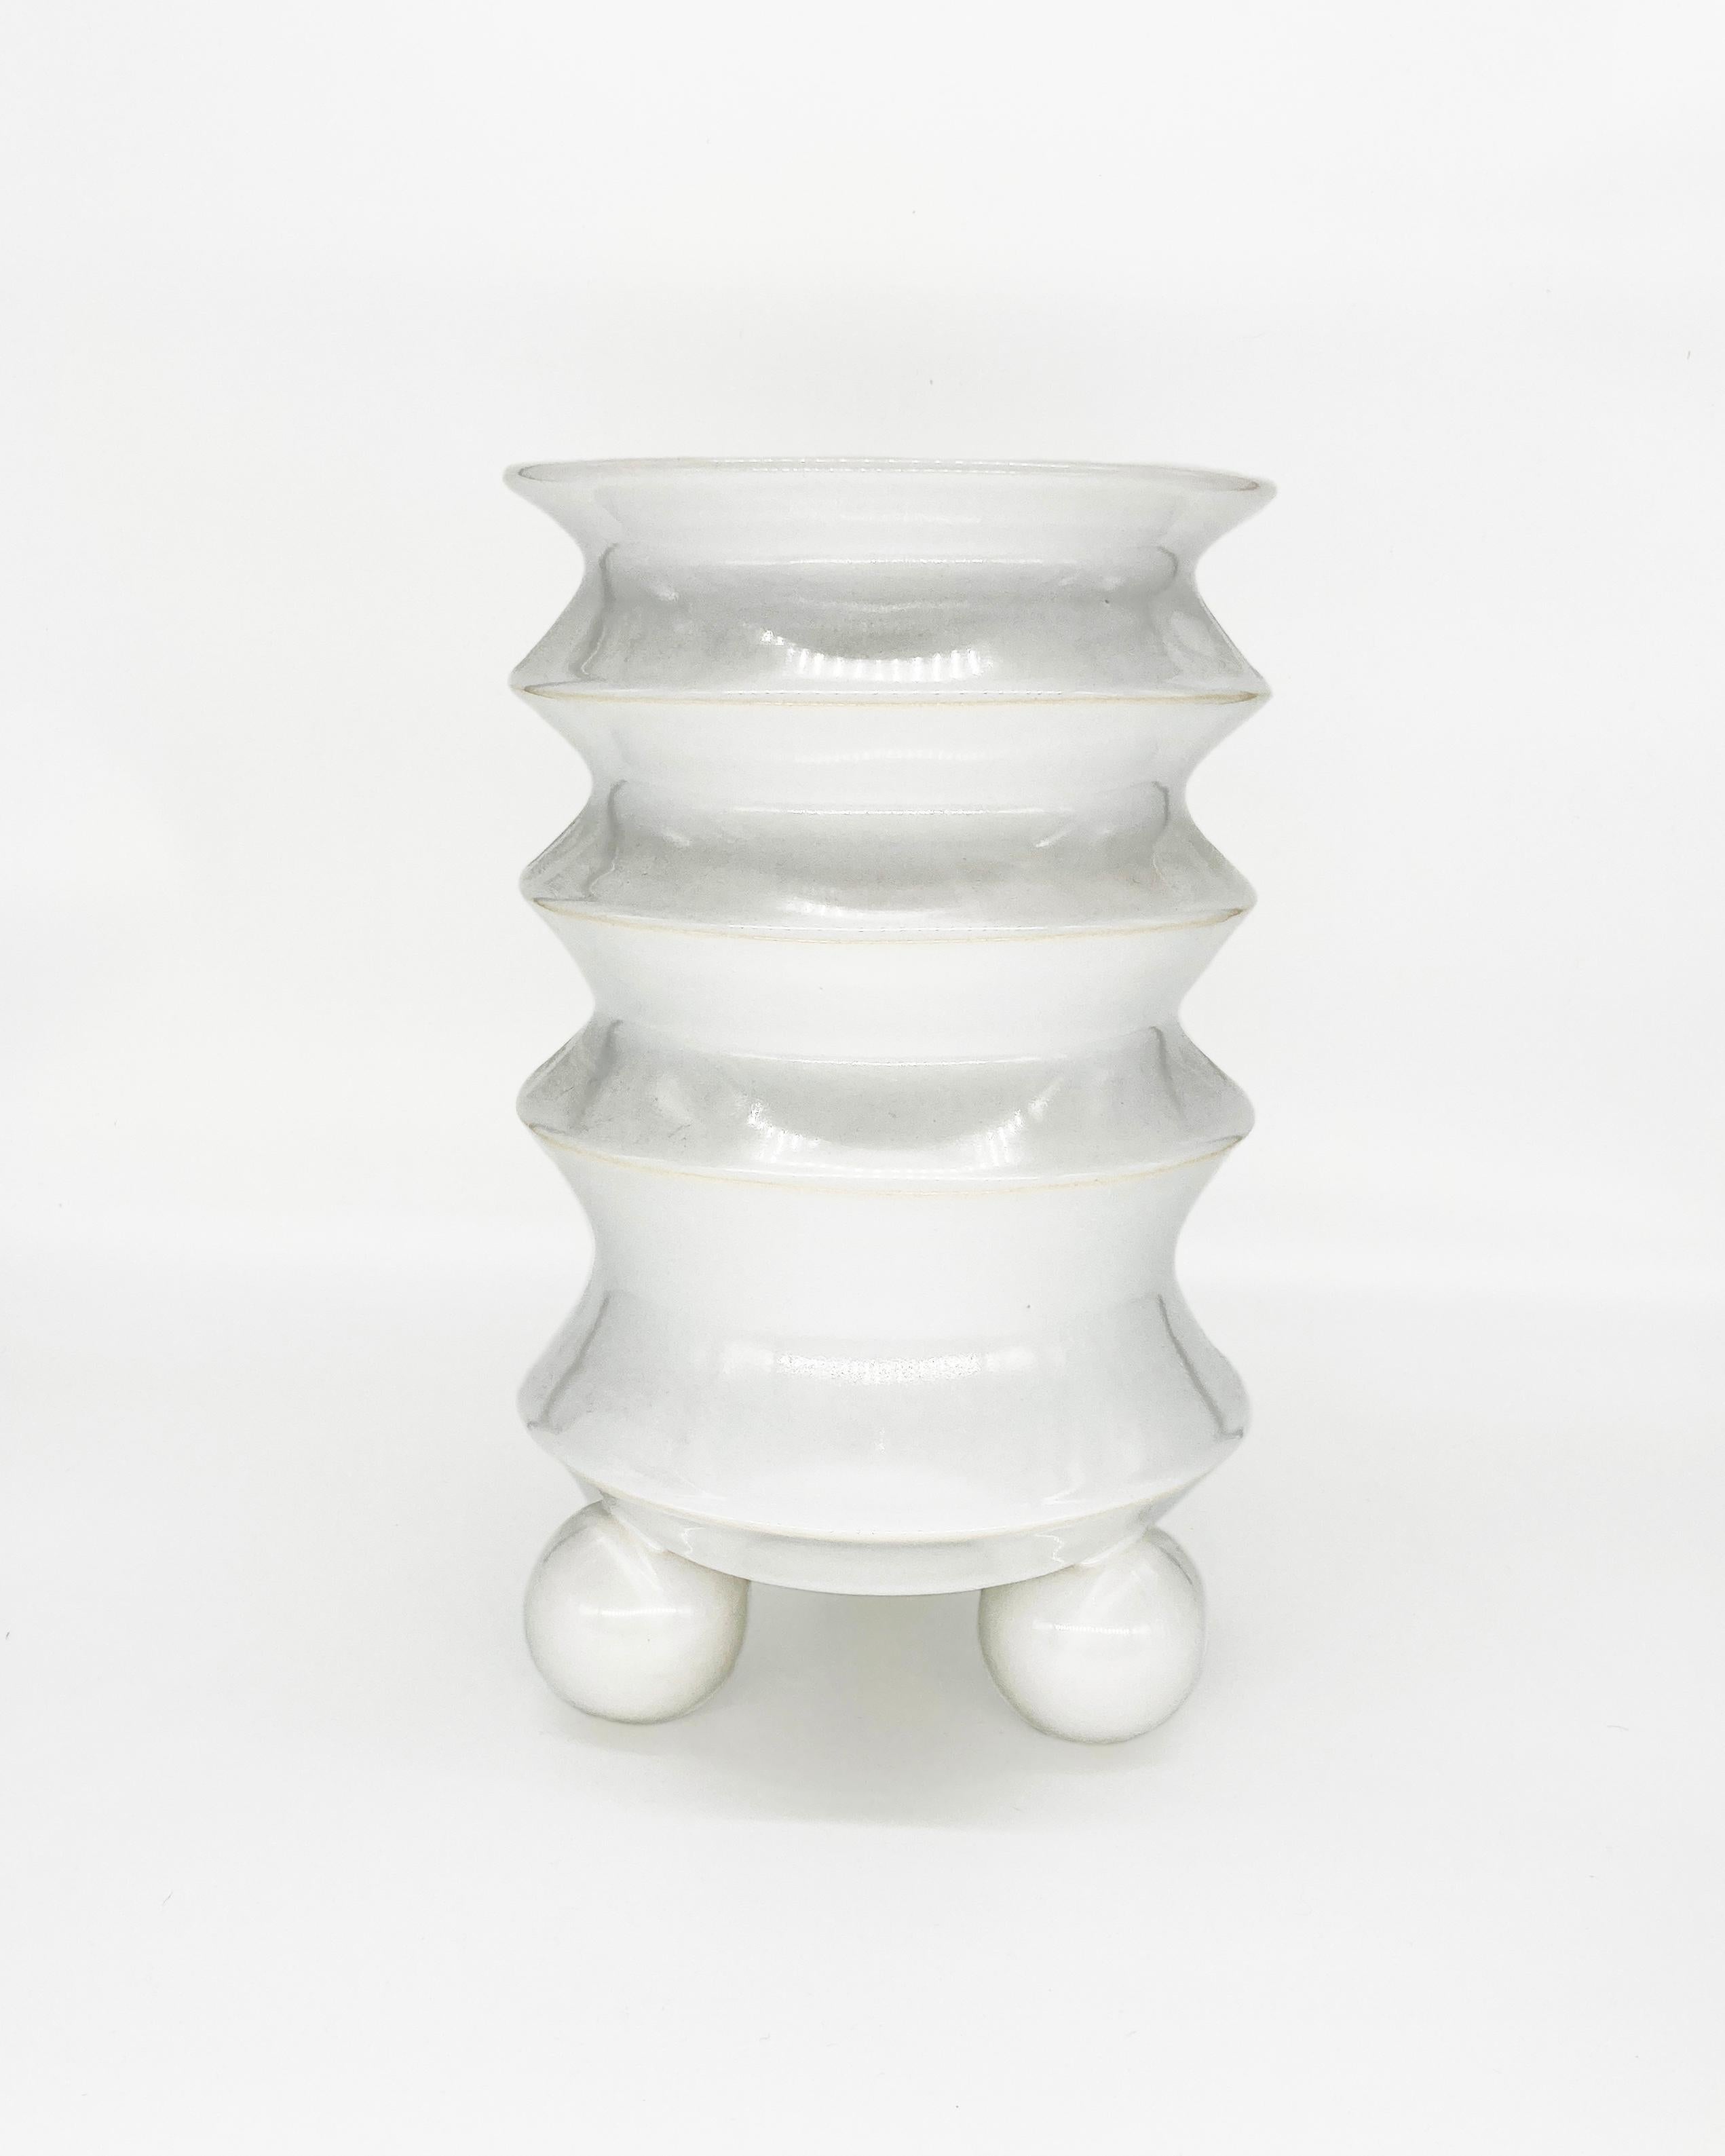 Post-Modern First Edition Toltec Pop Art Ceramic Vase in White, in Stock For Sale